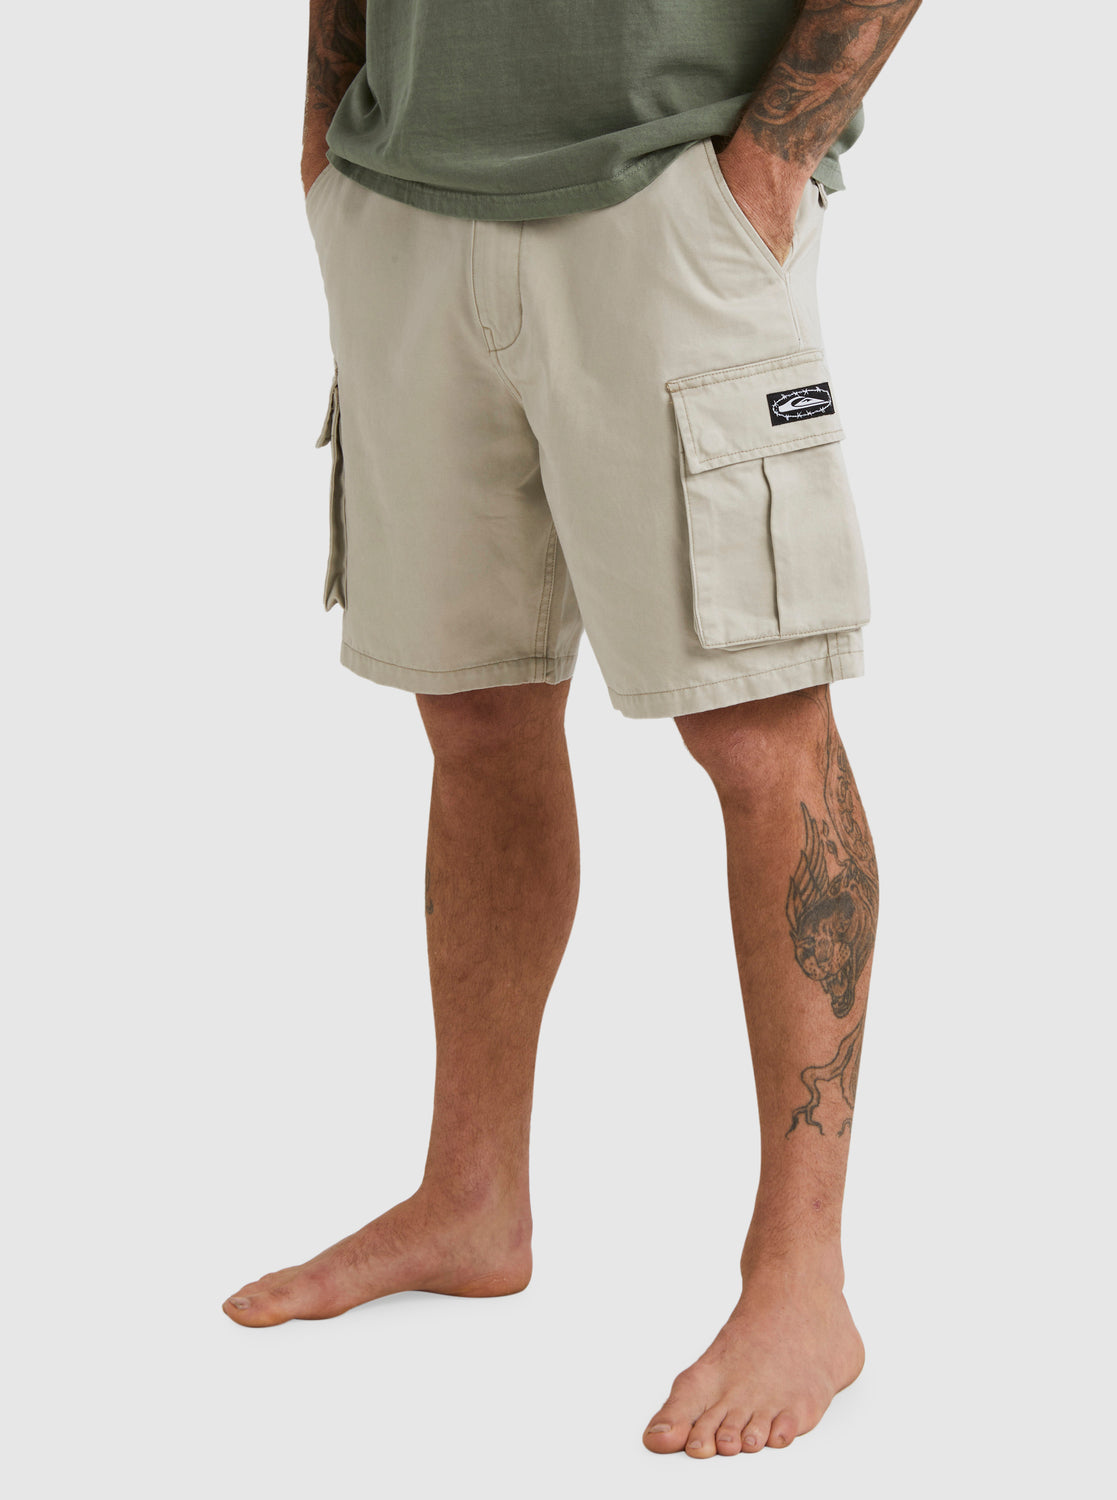 Quiksilver Mikey Cargo Shorts in goat colourway from side